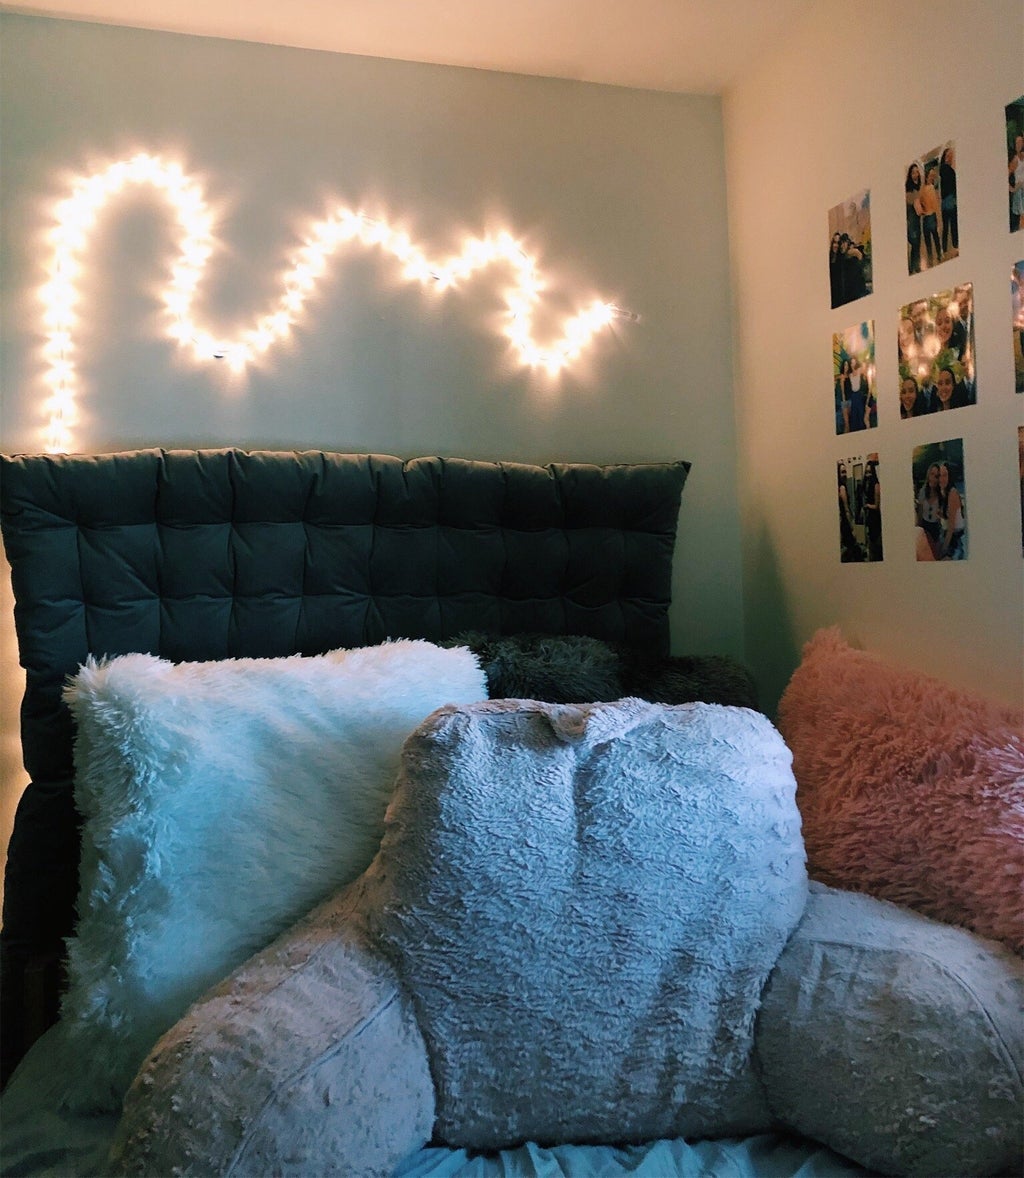 Dorm room bed with lights